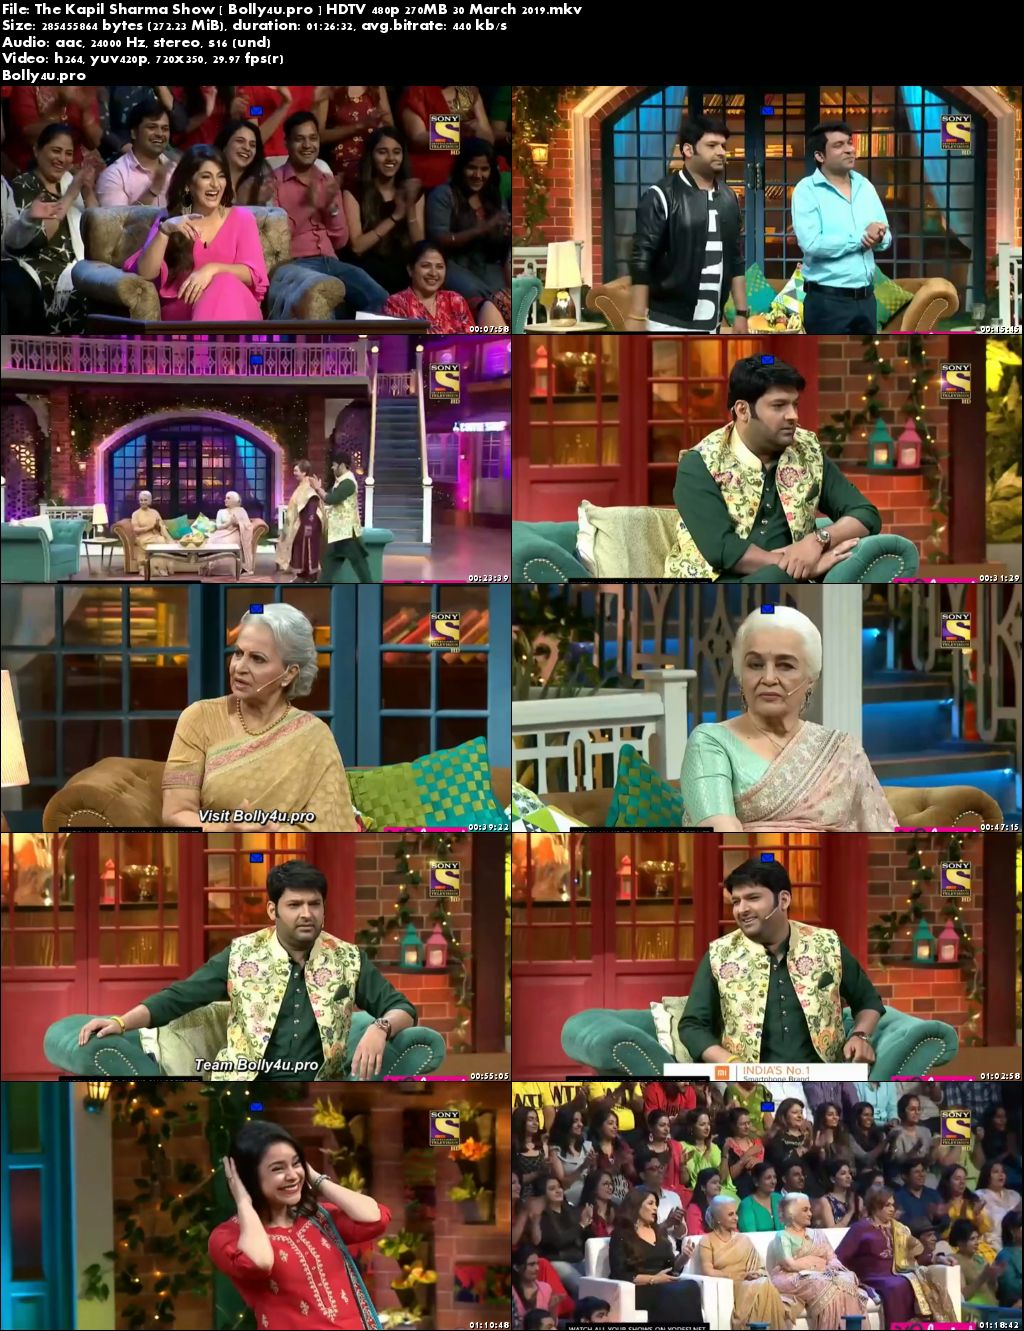 The Kapil Sharma Show HDTV 480p 250MB 30 March 2019 Download